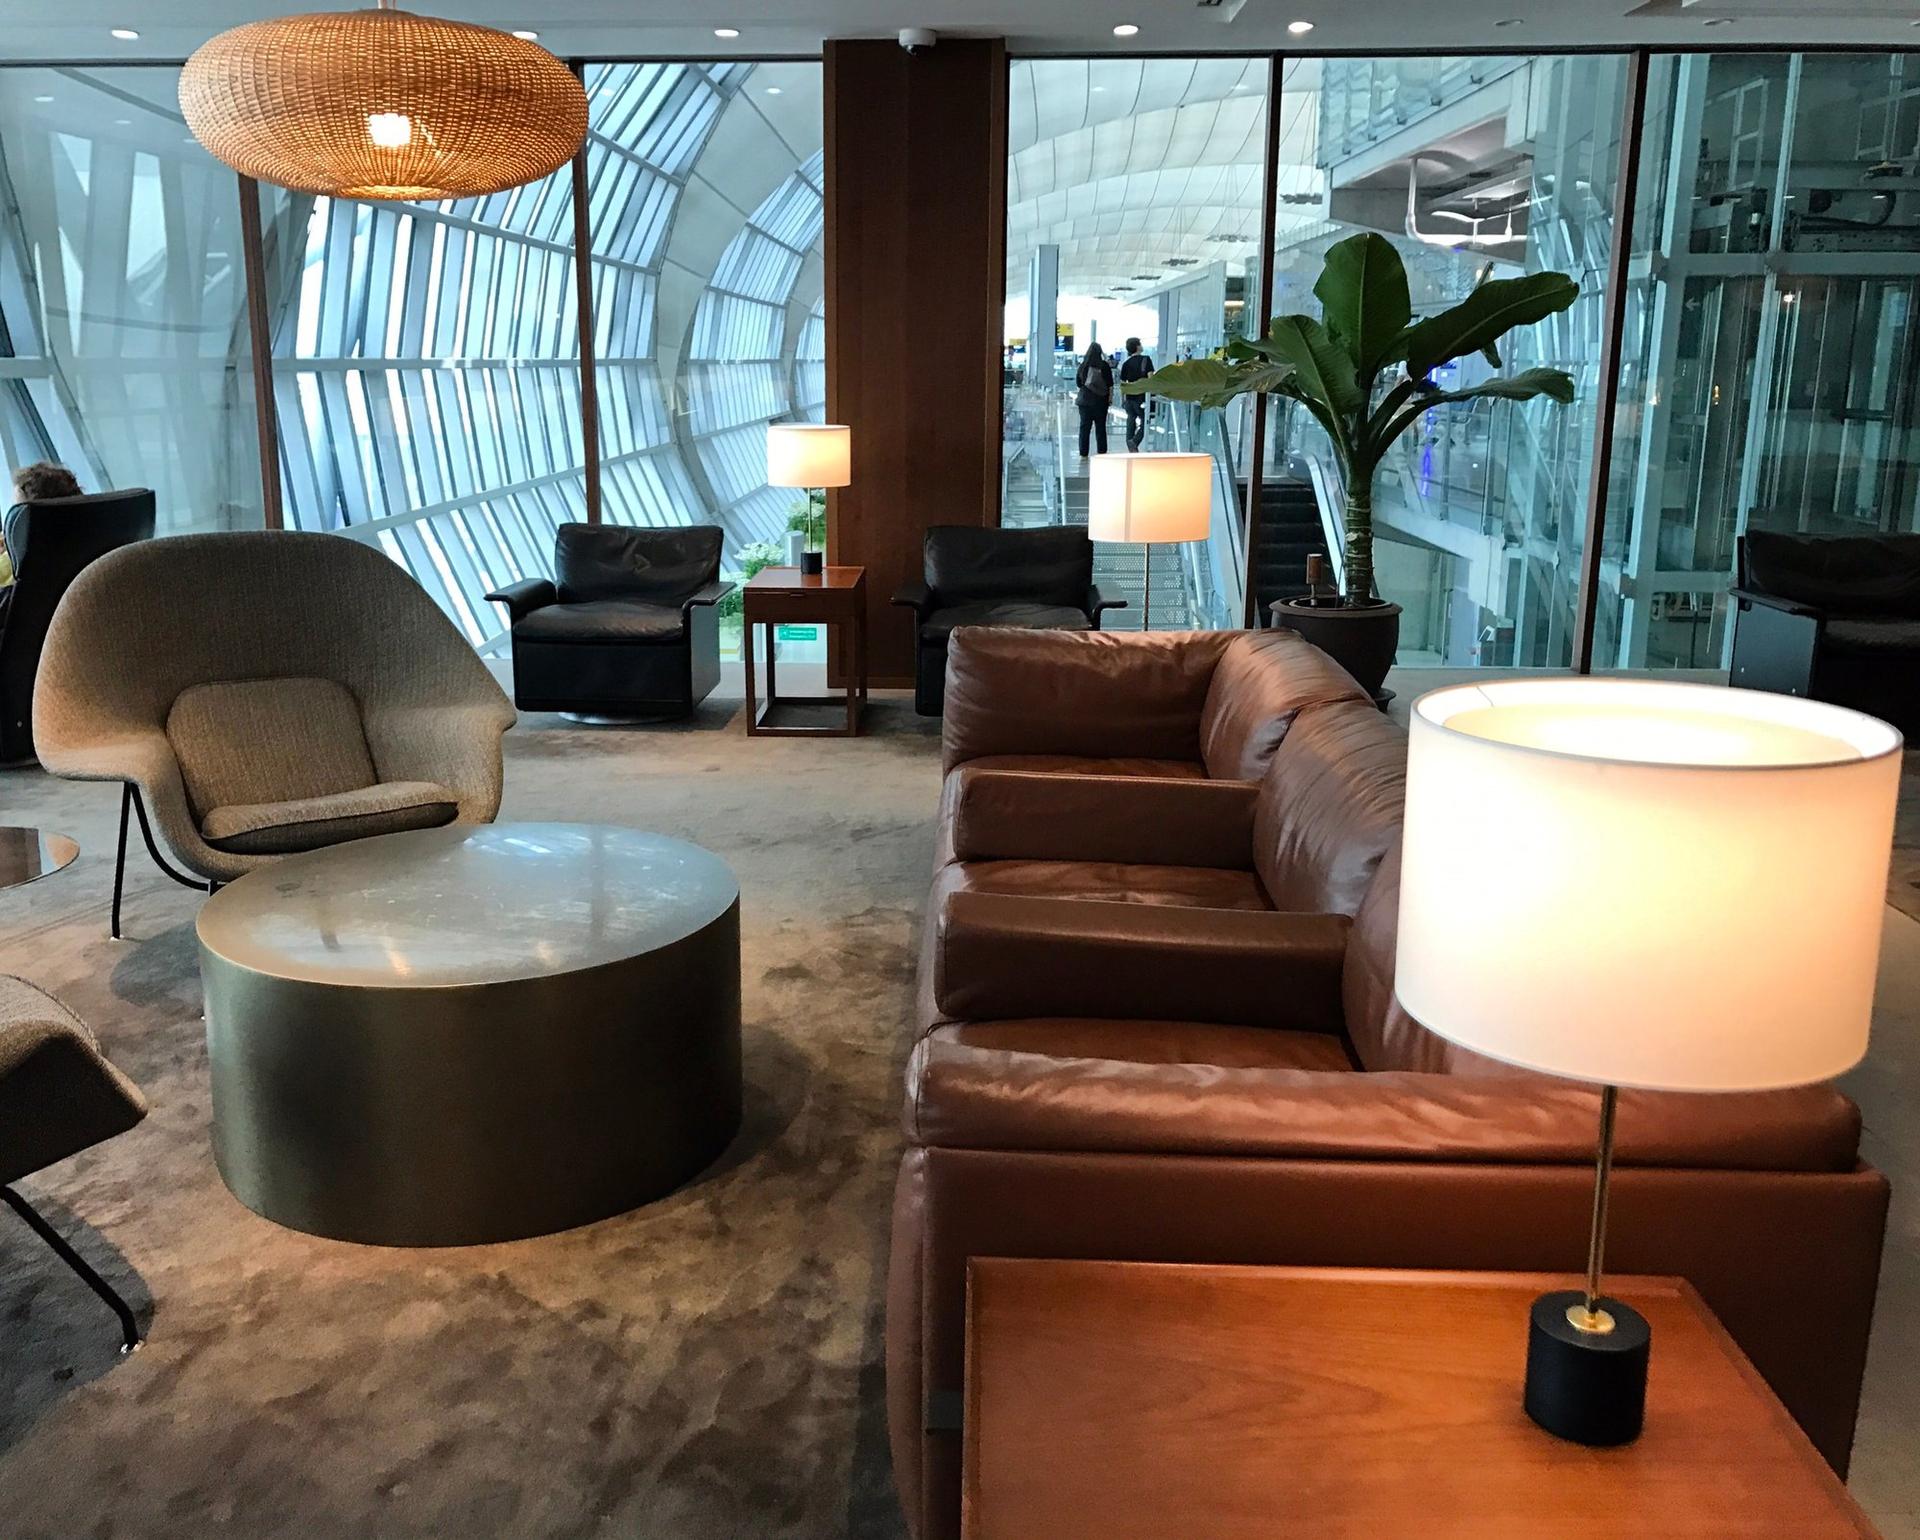 Cathay Pacific First and Business Class Lounge image 57 of 69